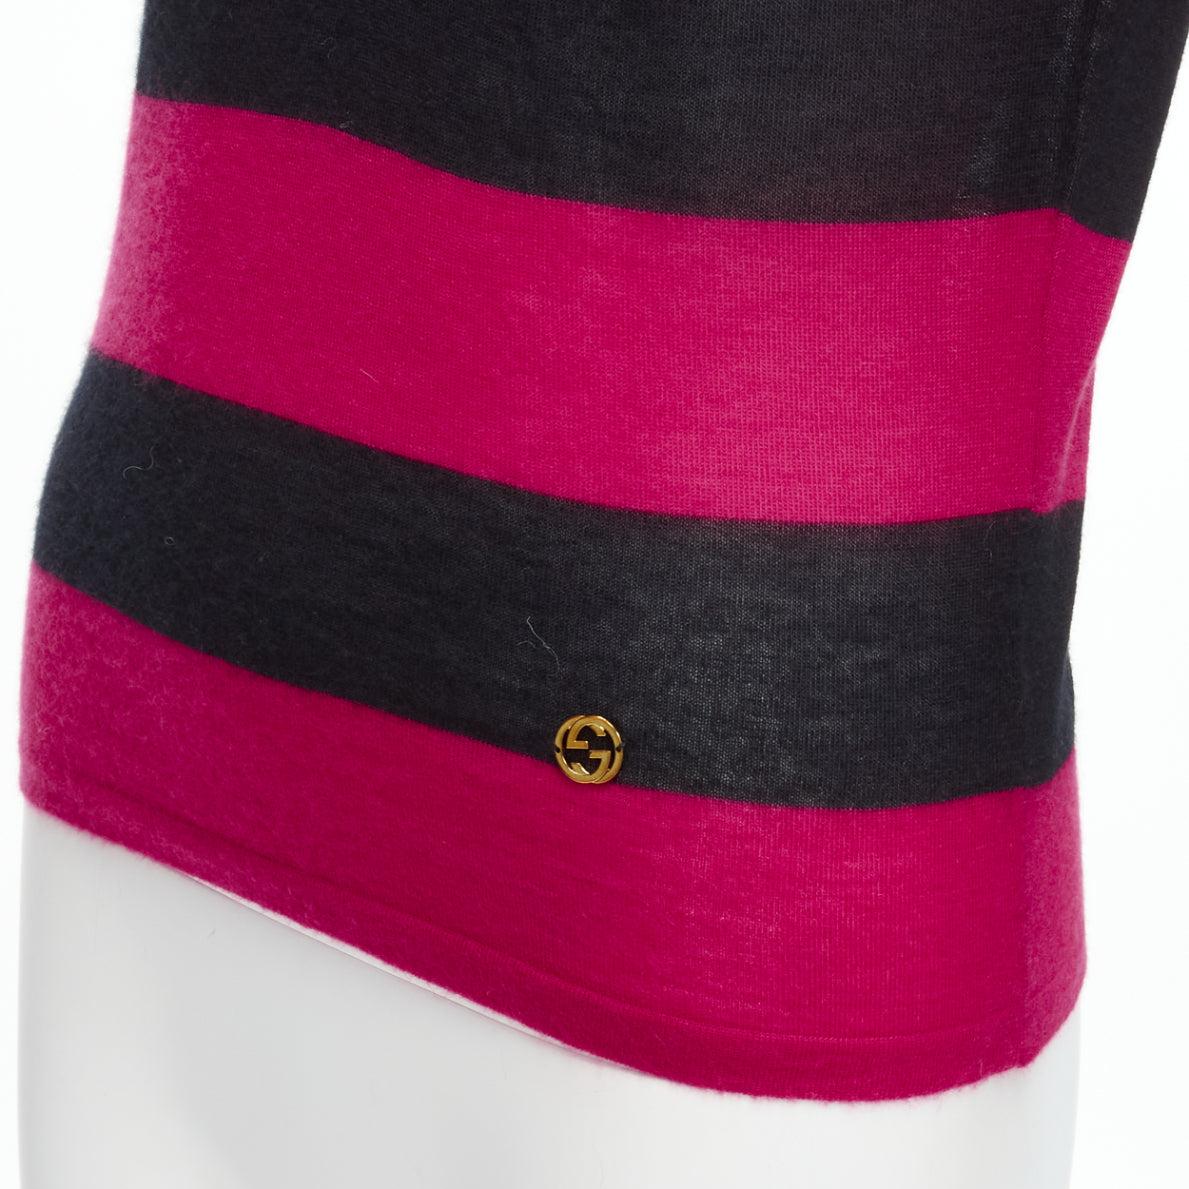 GUCCI 100% cashmere pink black GG logo charm cotton collar puff sleeve polo shirt IT38 XS
Reference: SNKO/A00240
Brand: Gucci
Material: Cashmere, Cotton
Color: Pink, Black
Pattern: Striped
Closure: Button
Extra Details: Invisible placket. GG gold